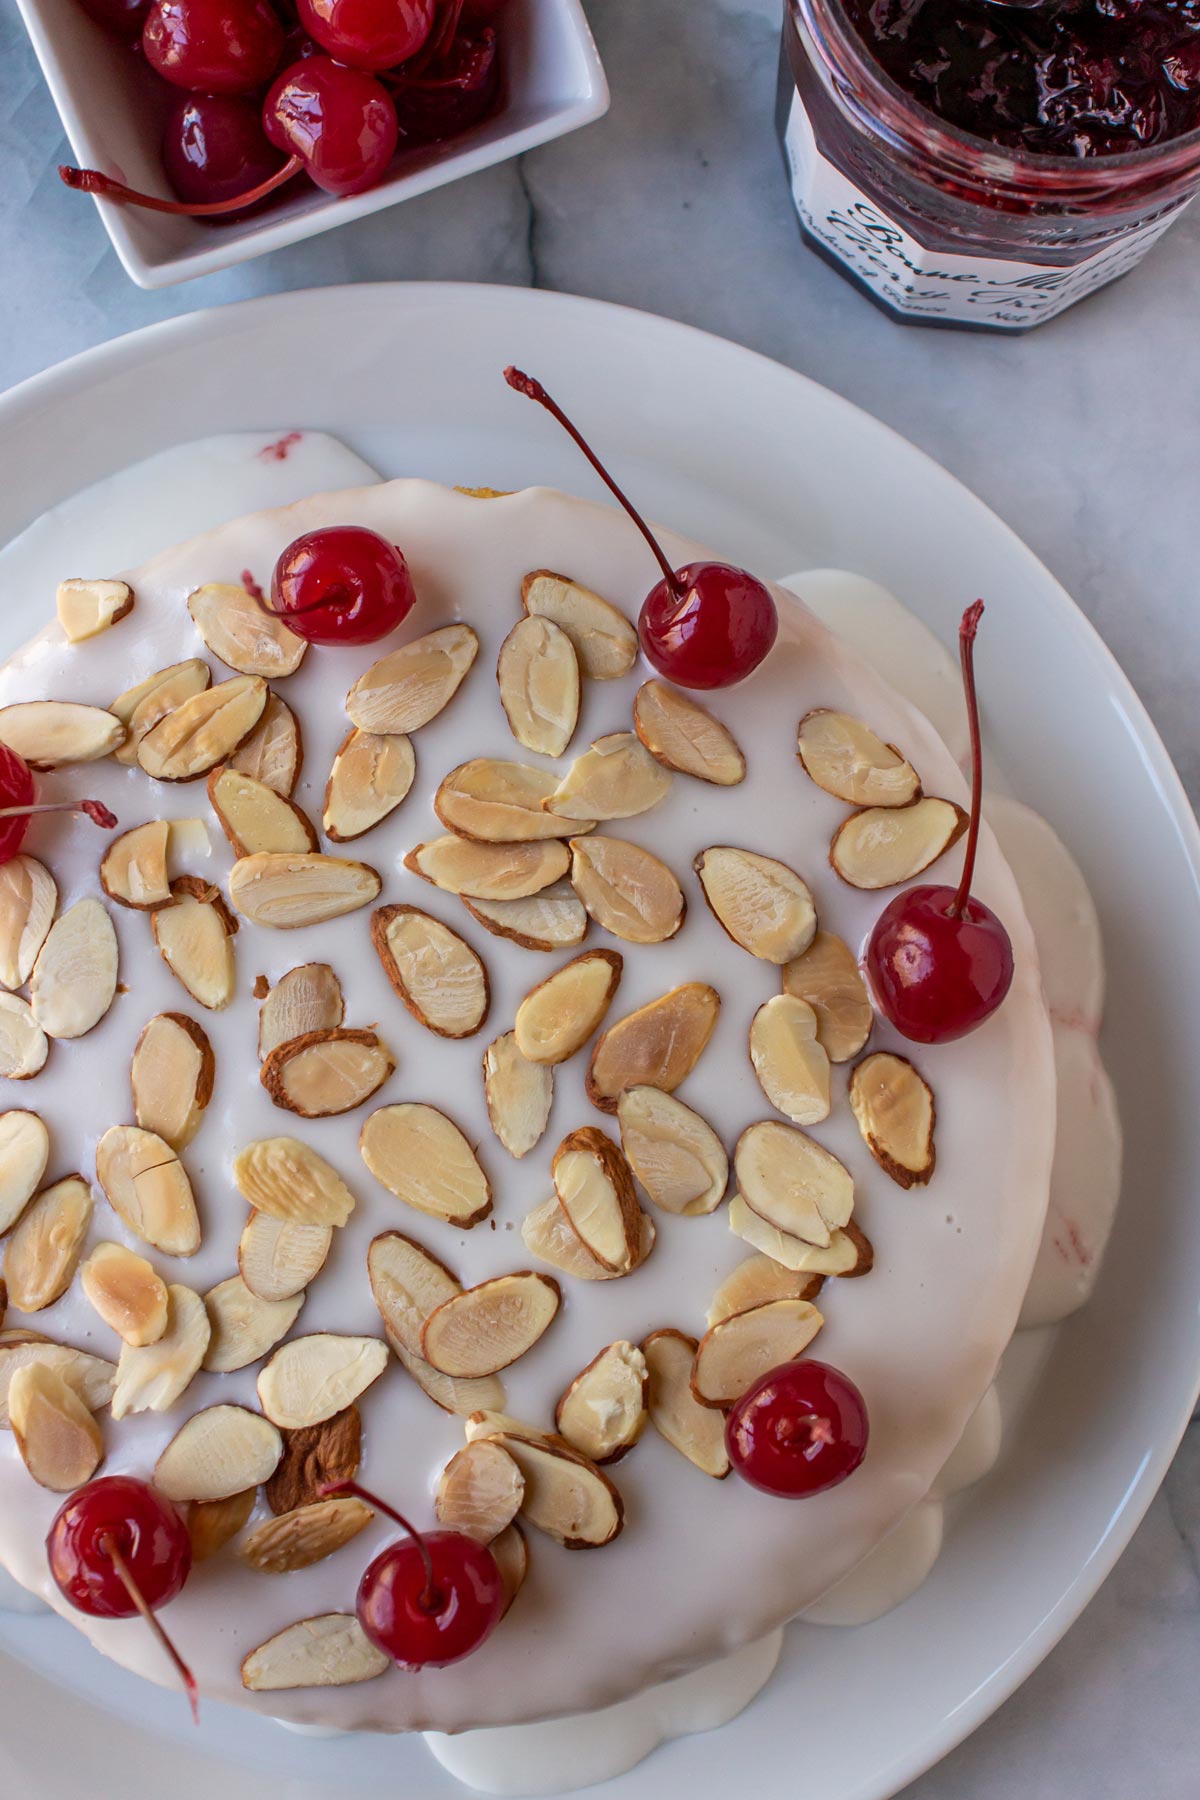 A cake on a white plate topped with white glaze, sliced almonds and maraschino cherries.